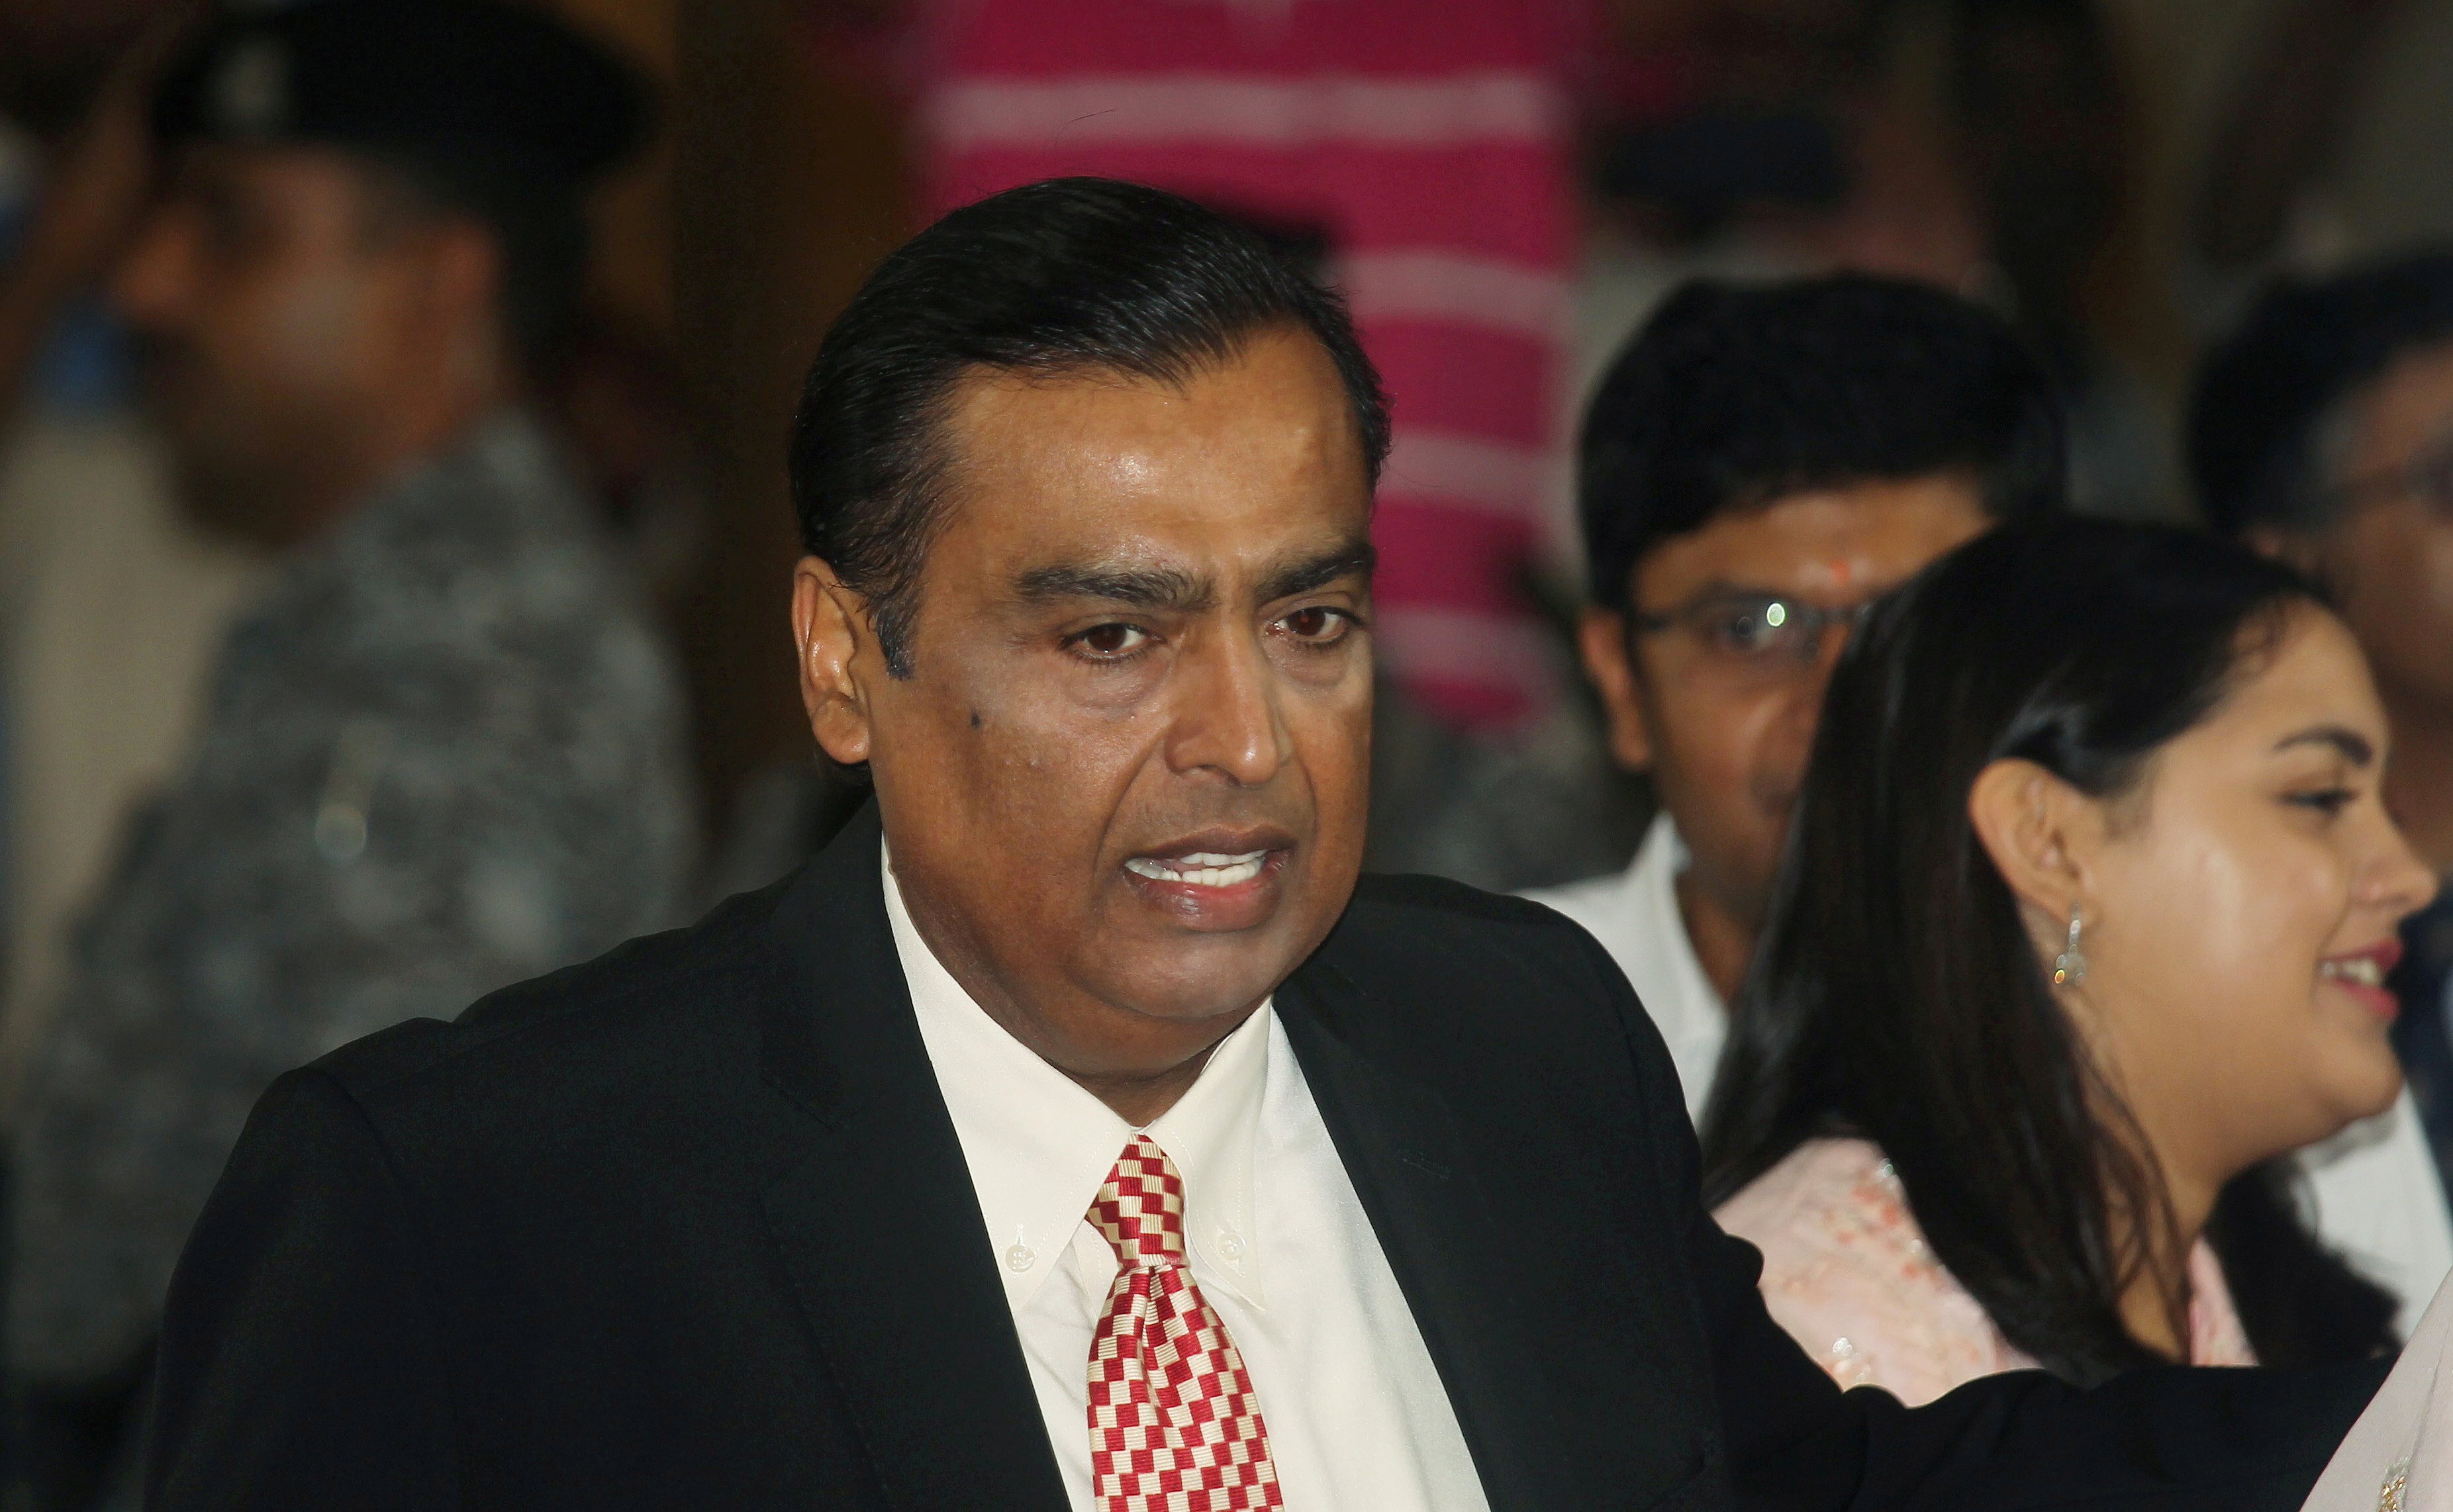 Mukesh Ambani, chairman and managing director of Reliance Industries, to invest billions in green projects. Photo: Reuters